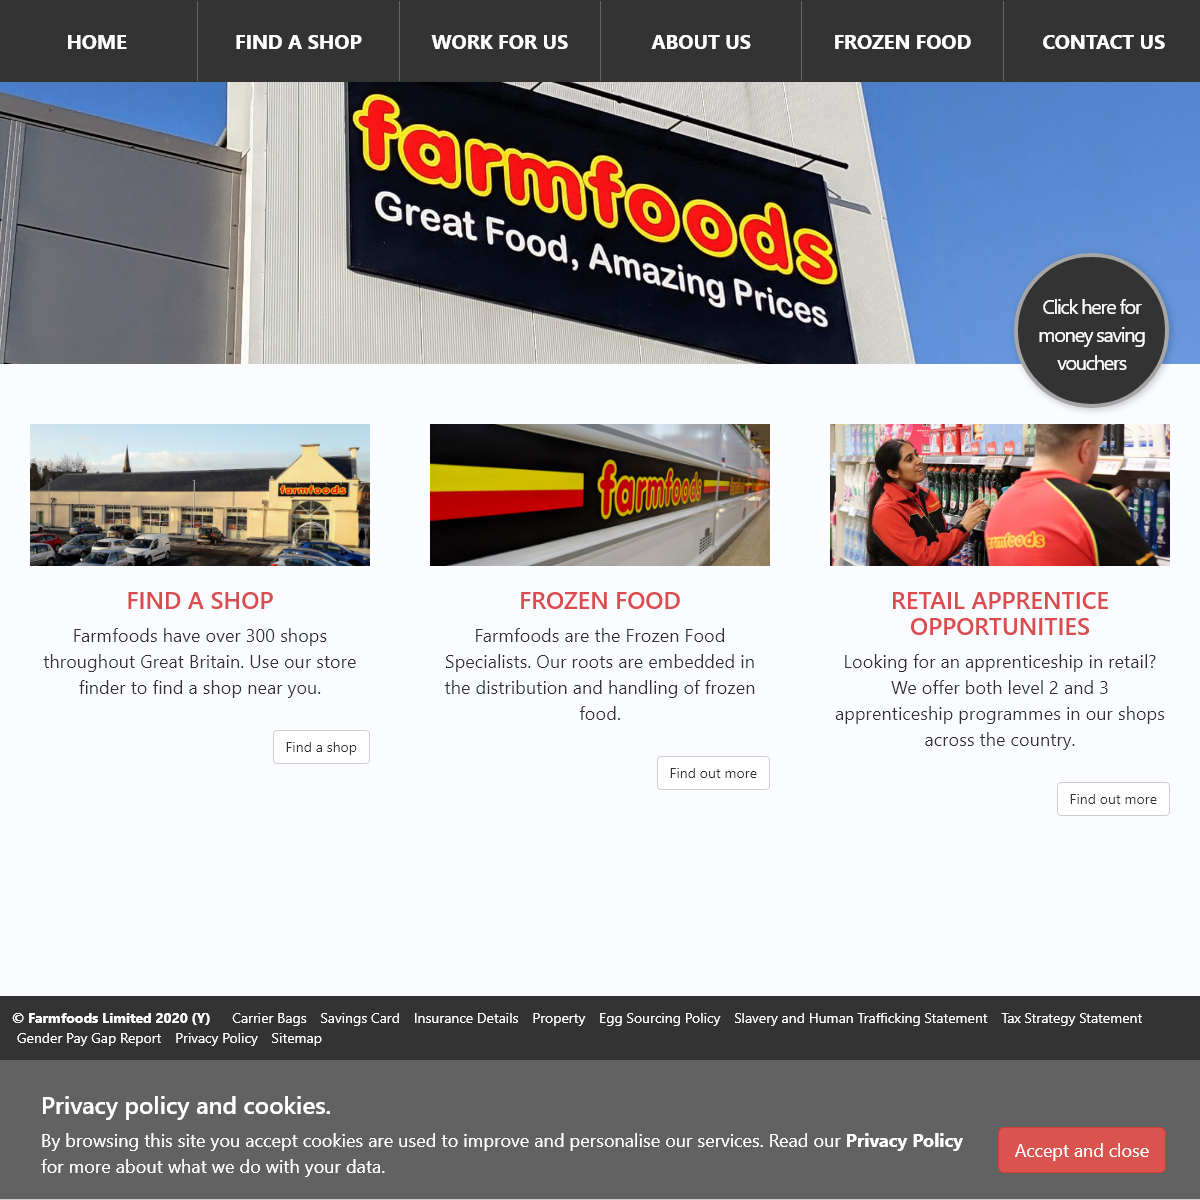 A complete backup of farmfoods.co.uk